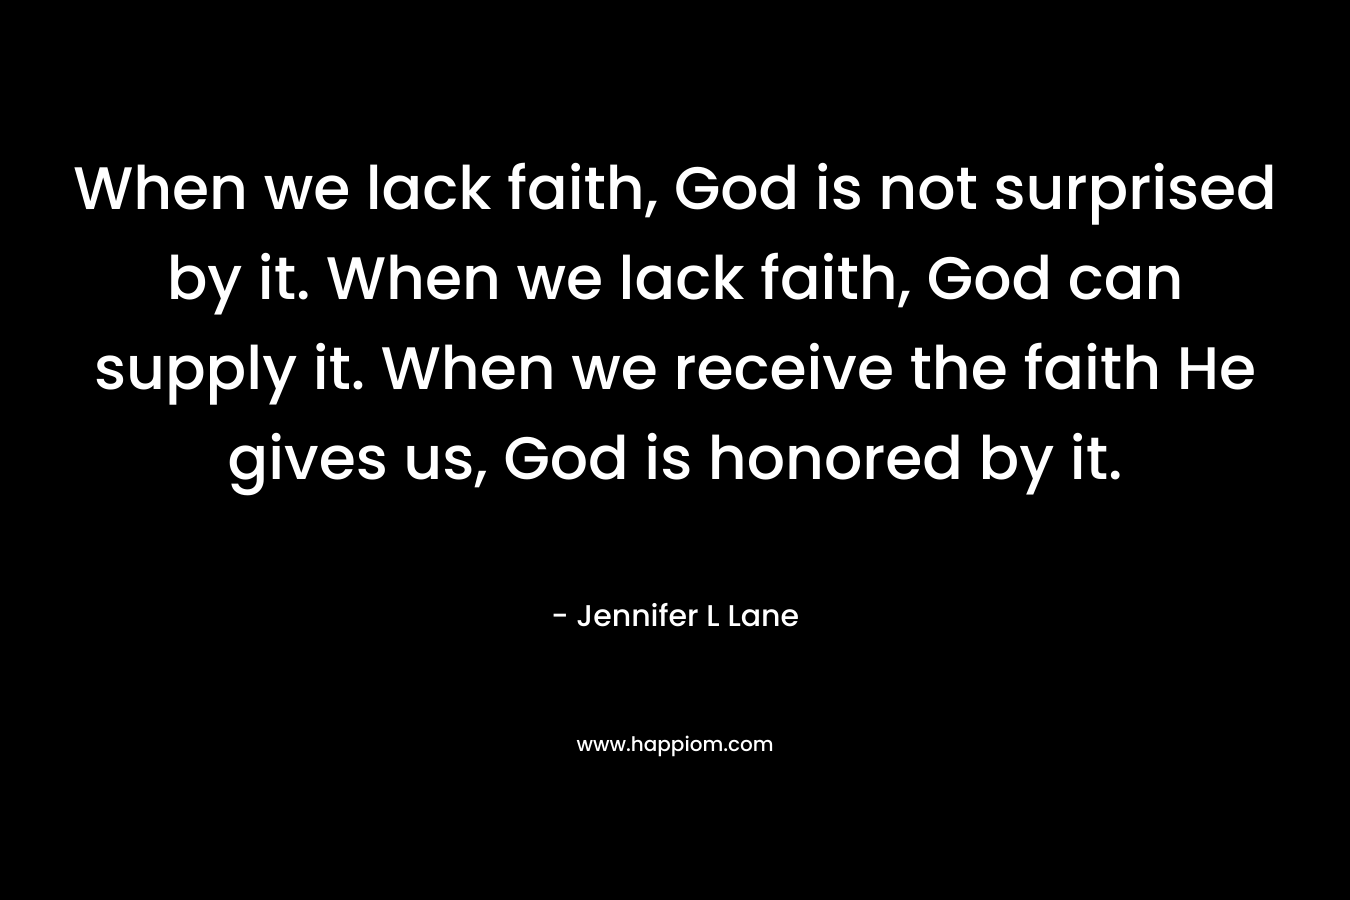 When we lack faith, God is not surprised by it. When we lack faith, God can supply it. When we receive the faith He gives us, God is honored by it.